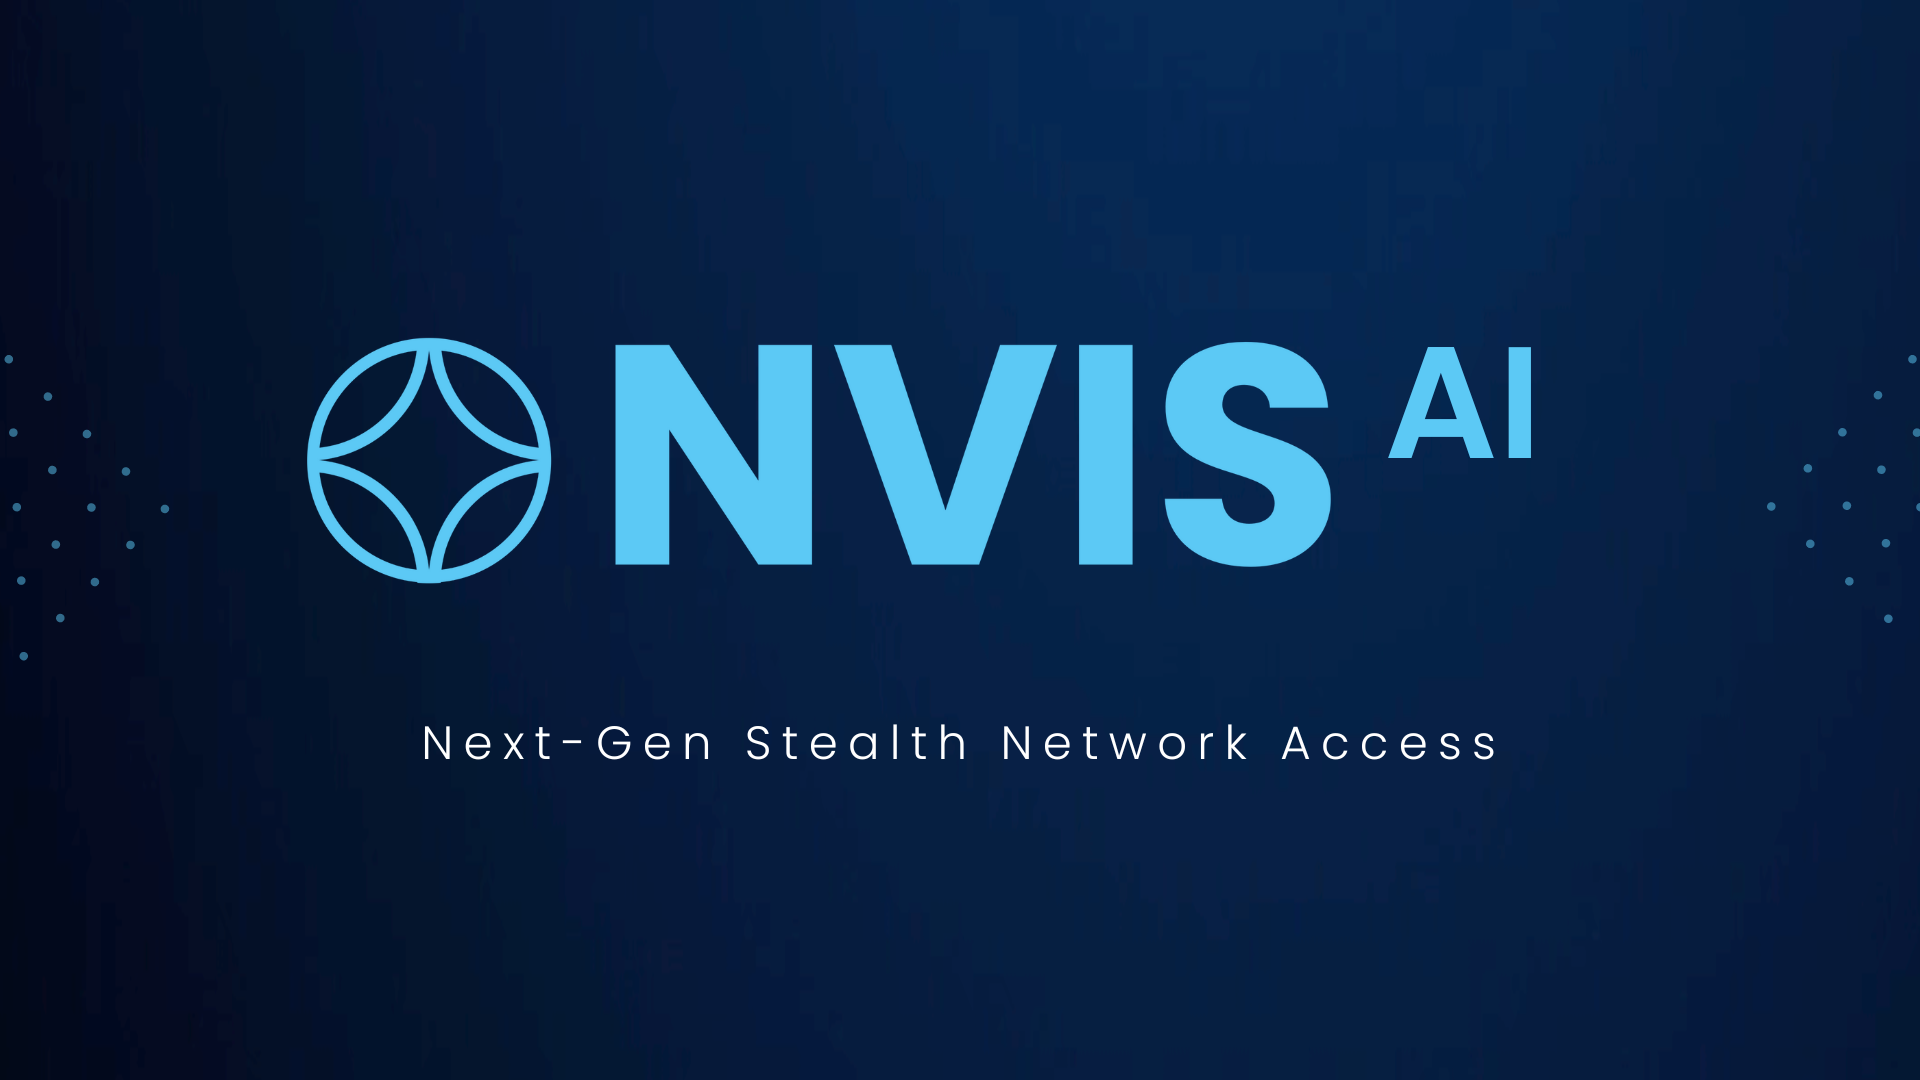 NVIS Rebrands to NVIS AI